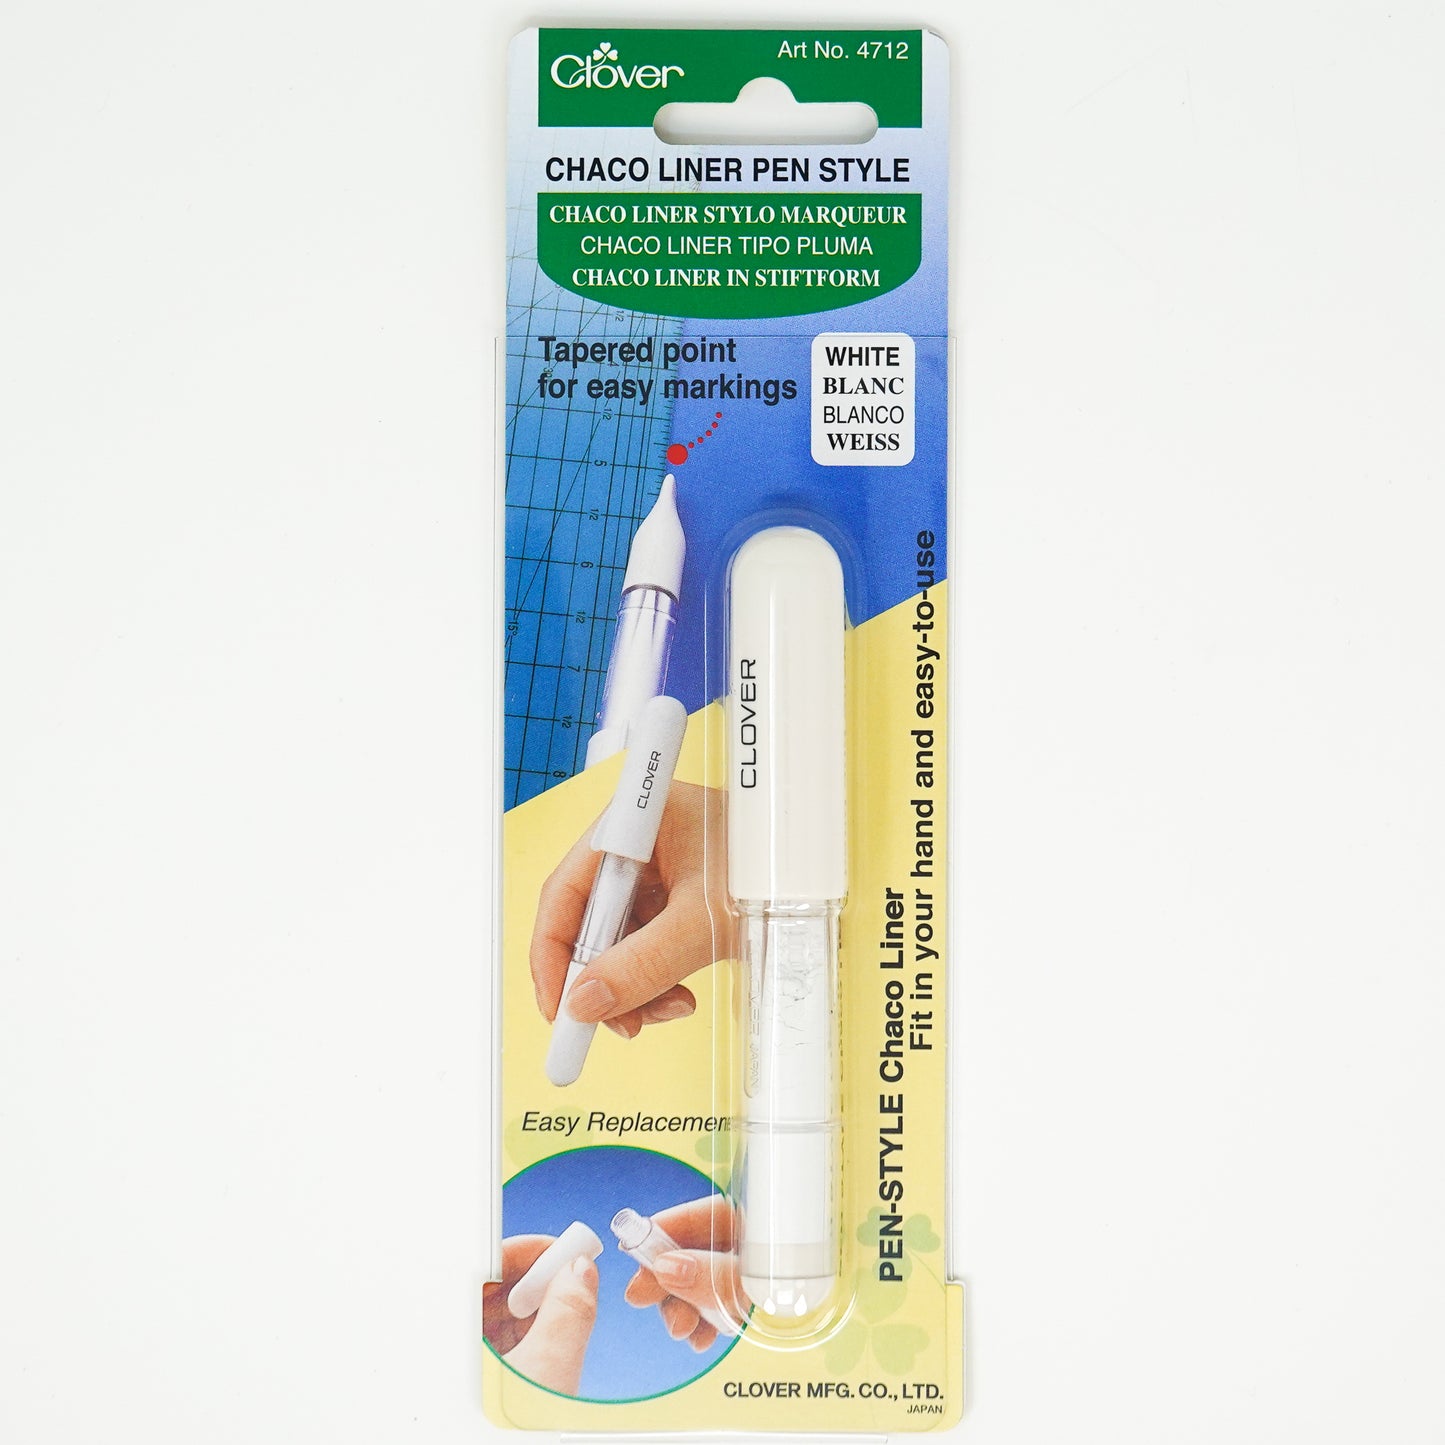 Chaco Liner Pen Style - White